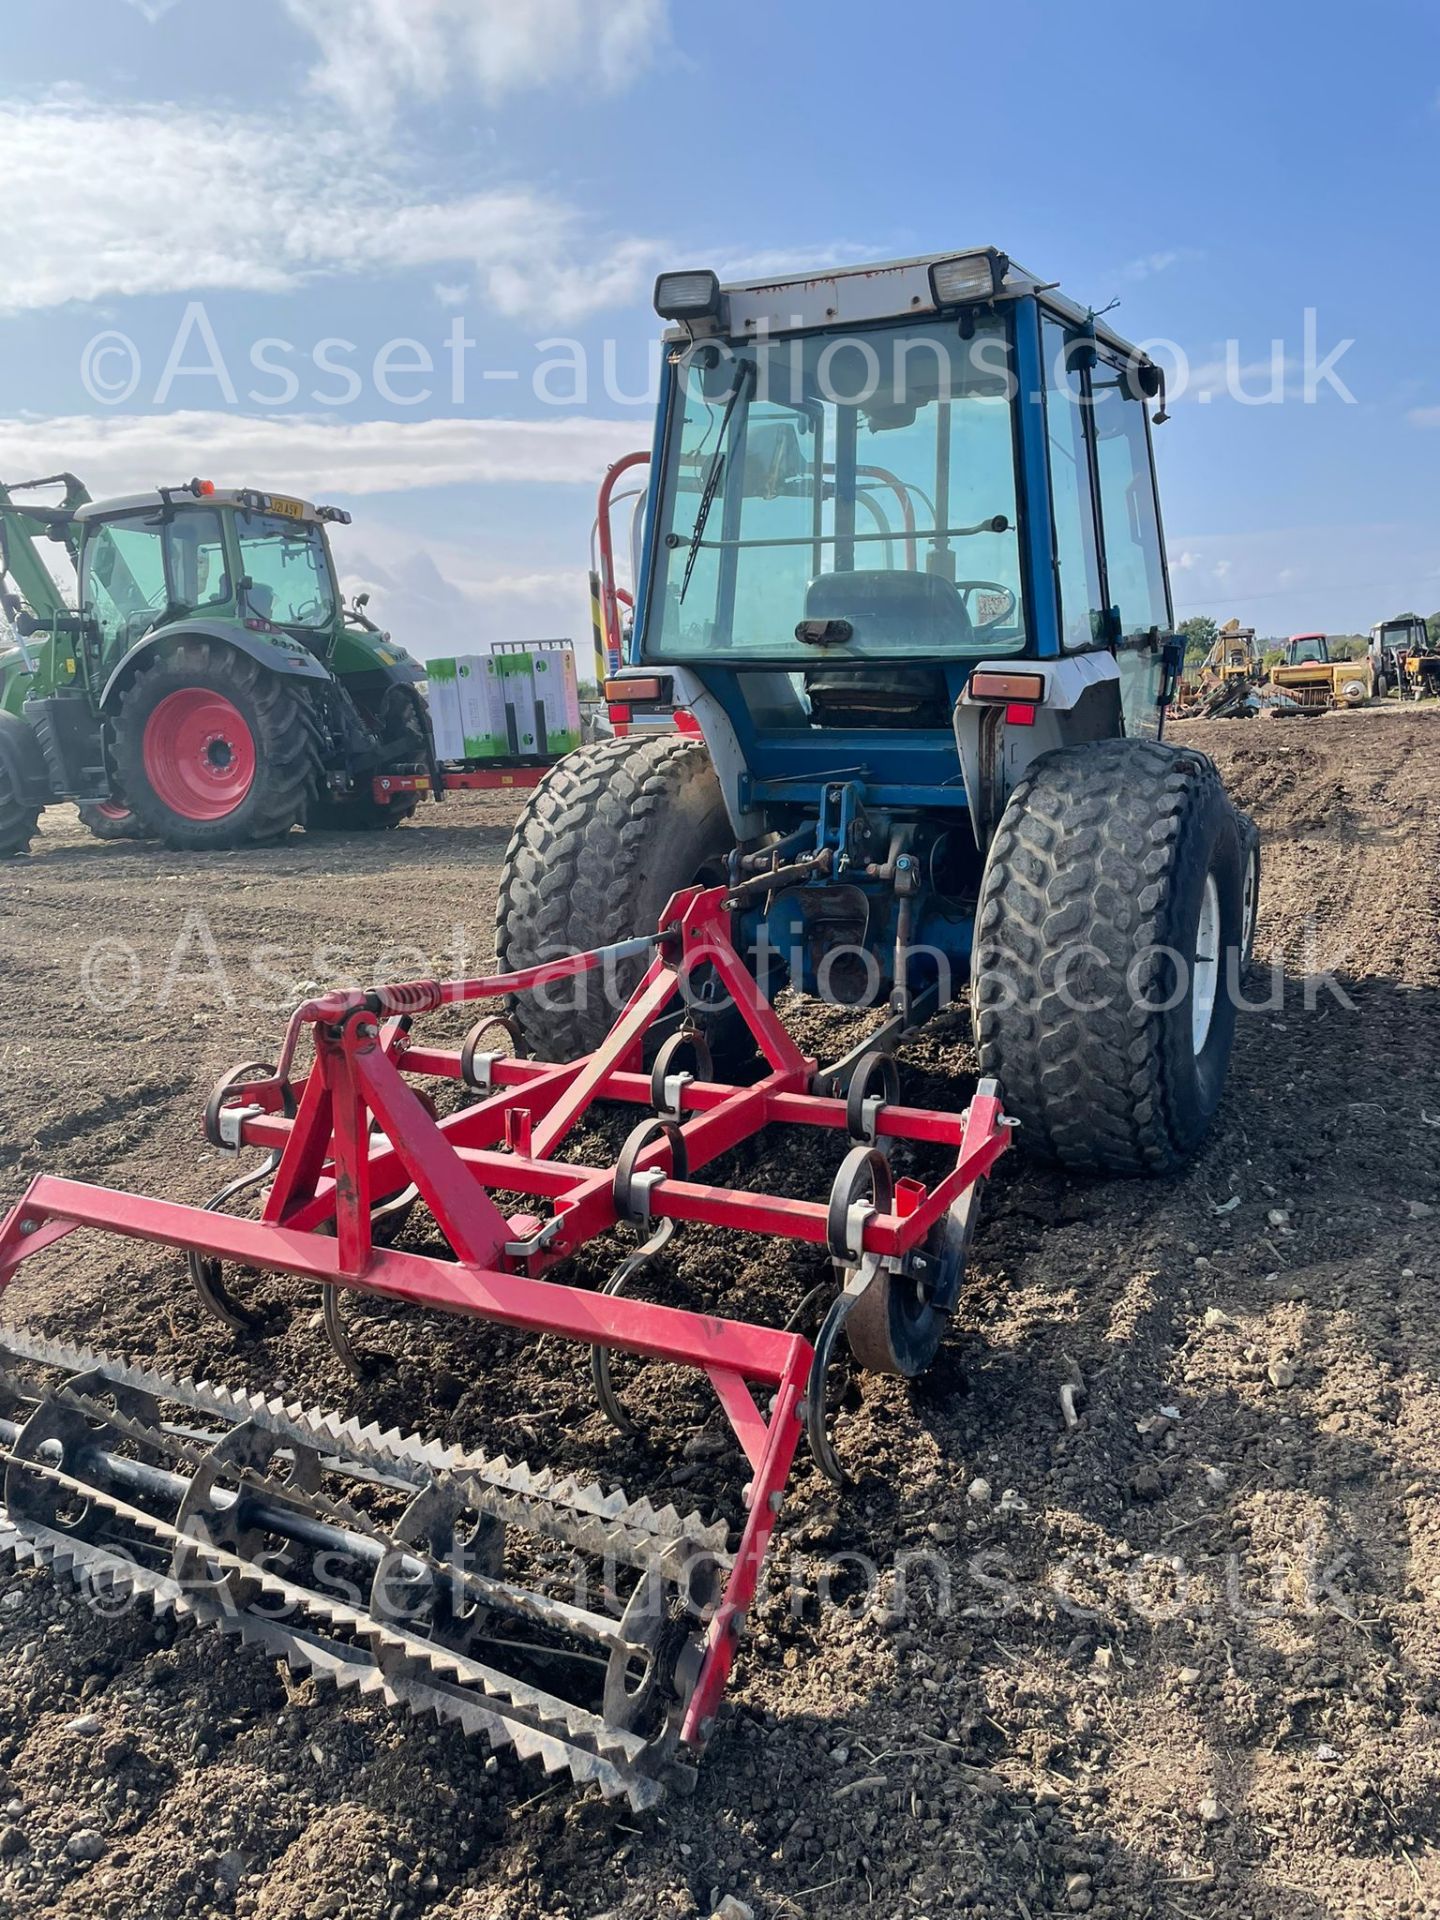 FORD 2120 TRACTOR WITH CULTIVATOR, 4 WHEEL DRIVE, STILL IN USE, RUNS AND WORKS *NO VAT* - Image 7 of 12